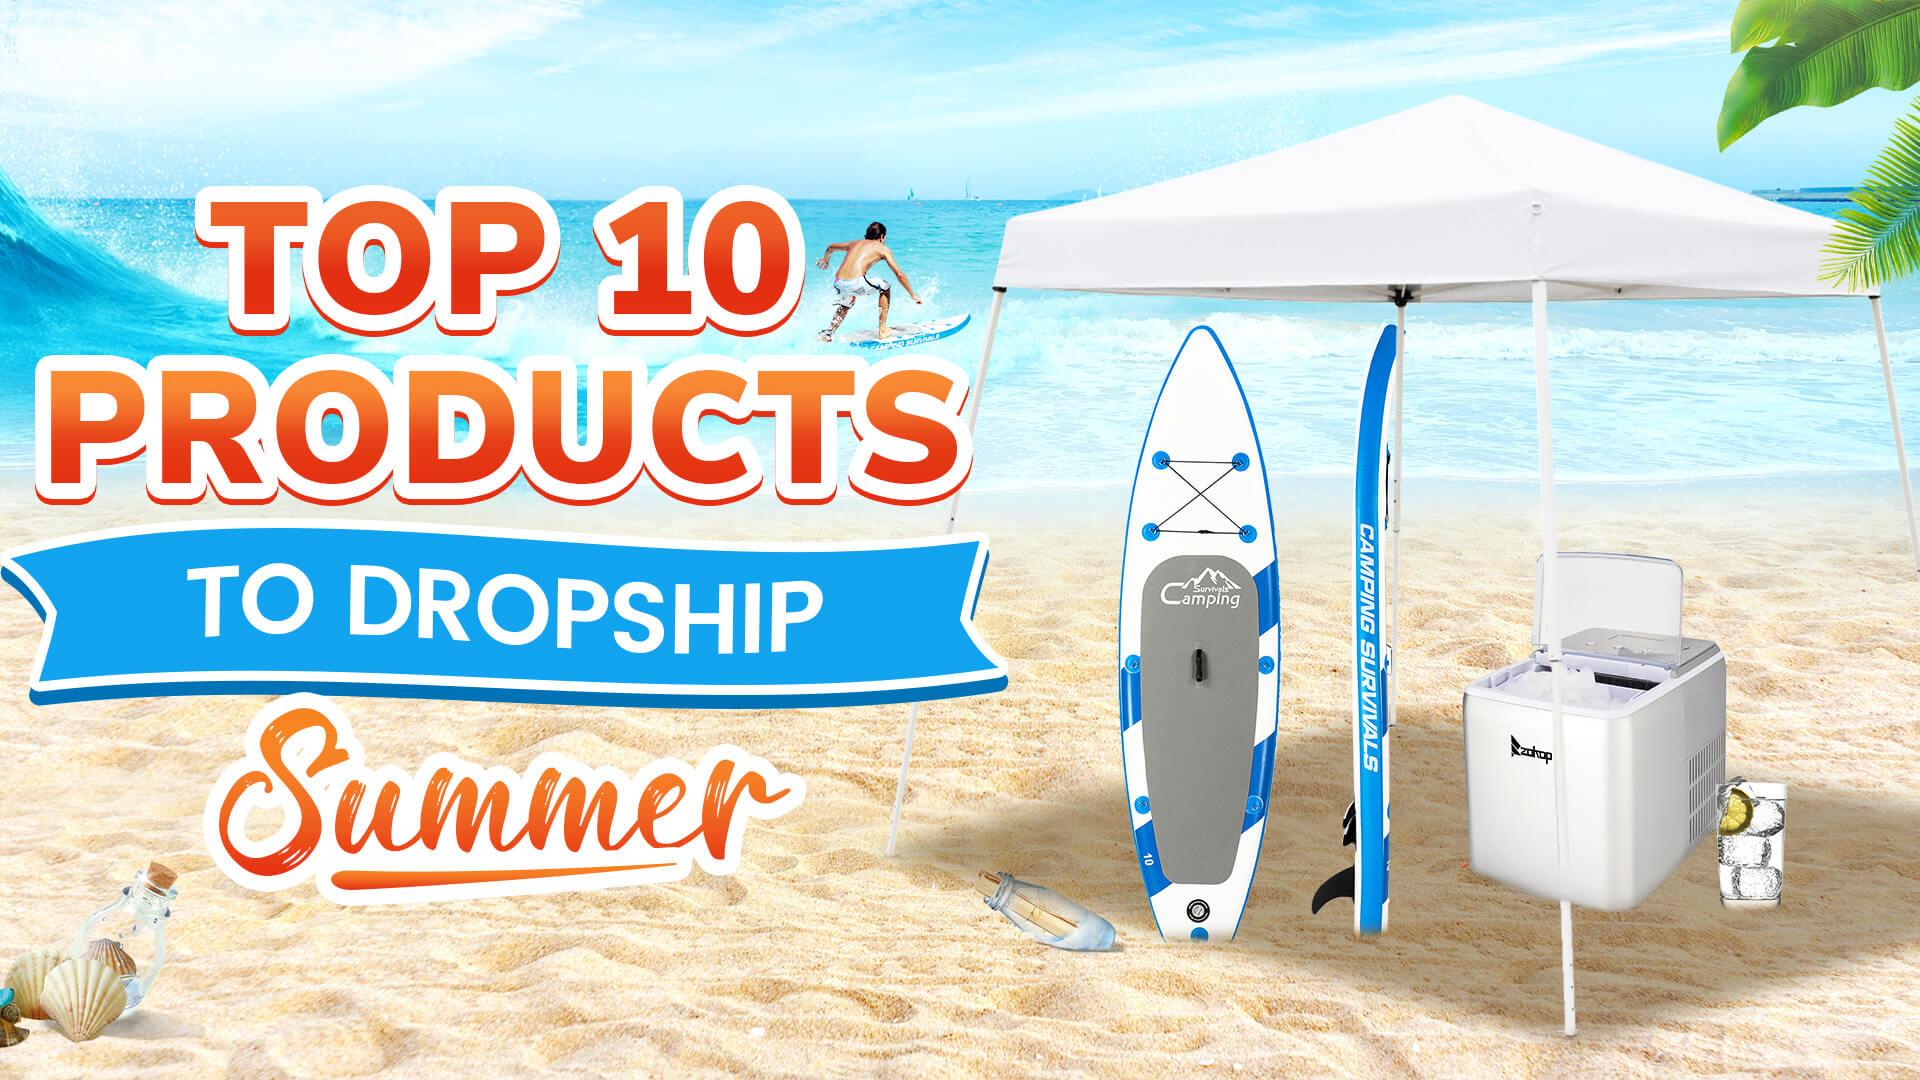 Top 10 Products to Dropship in Summer (2022)